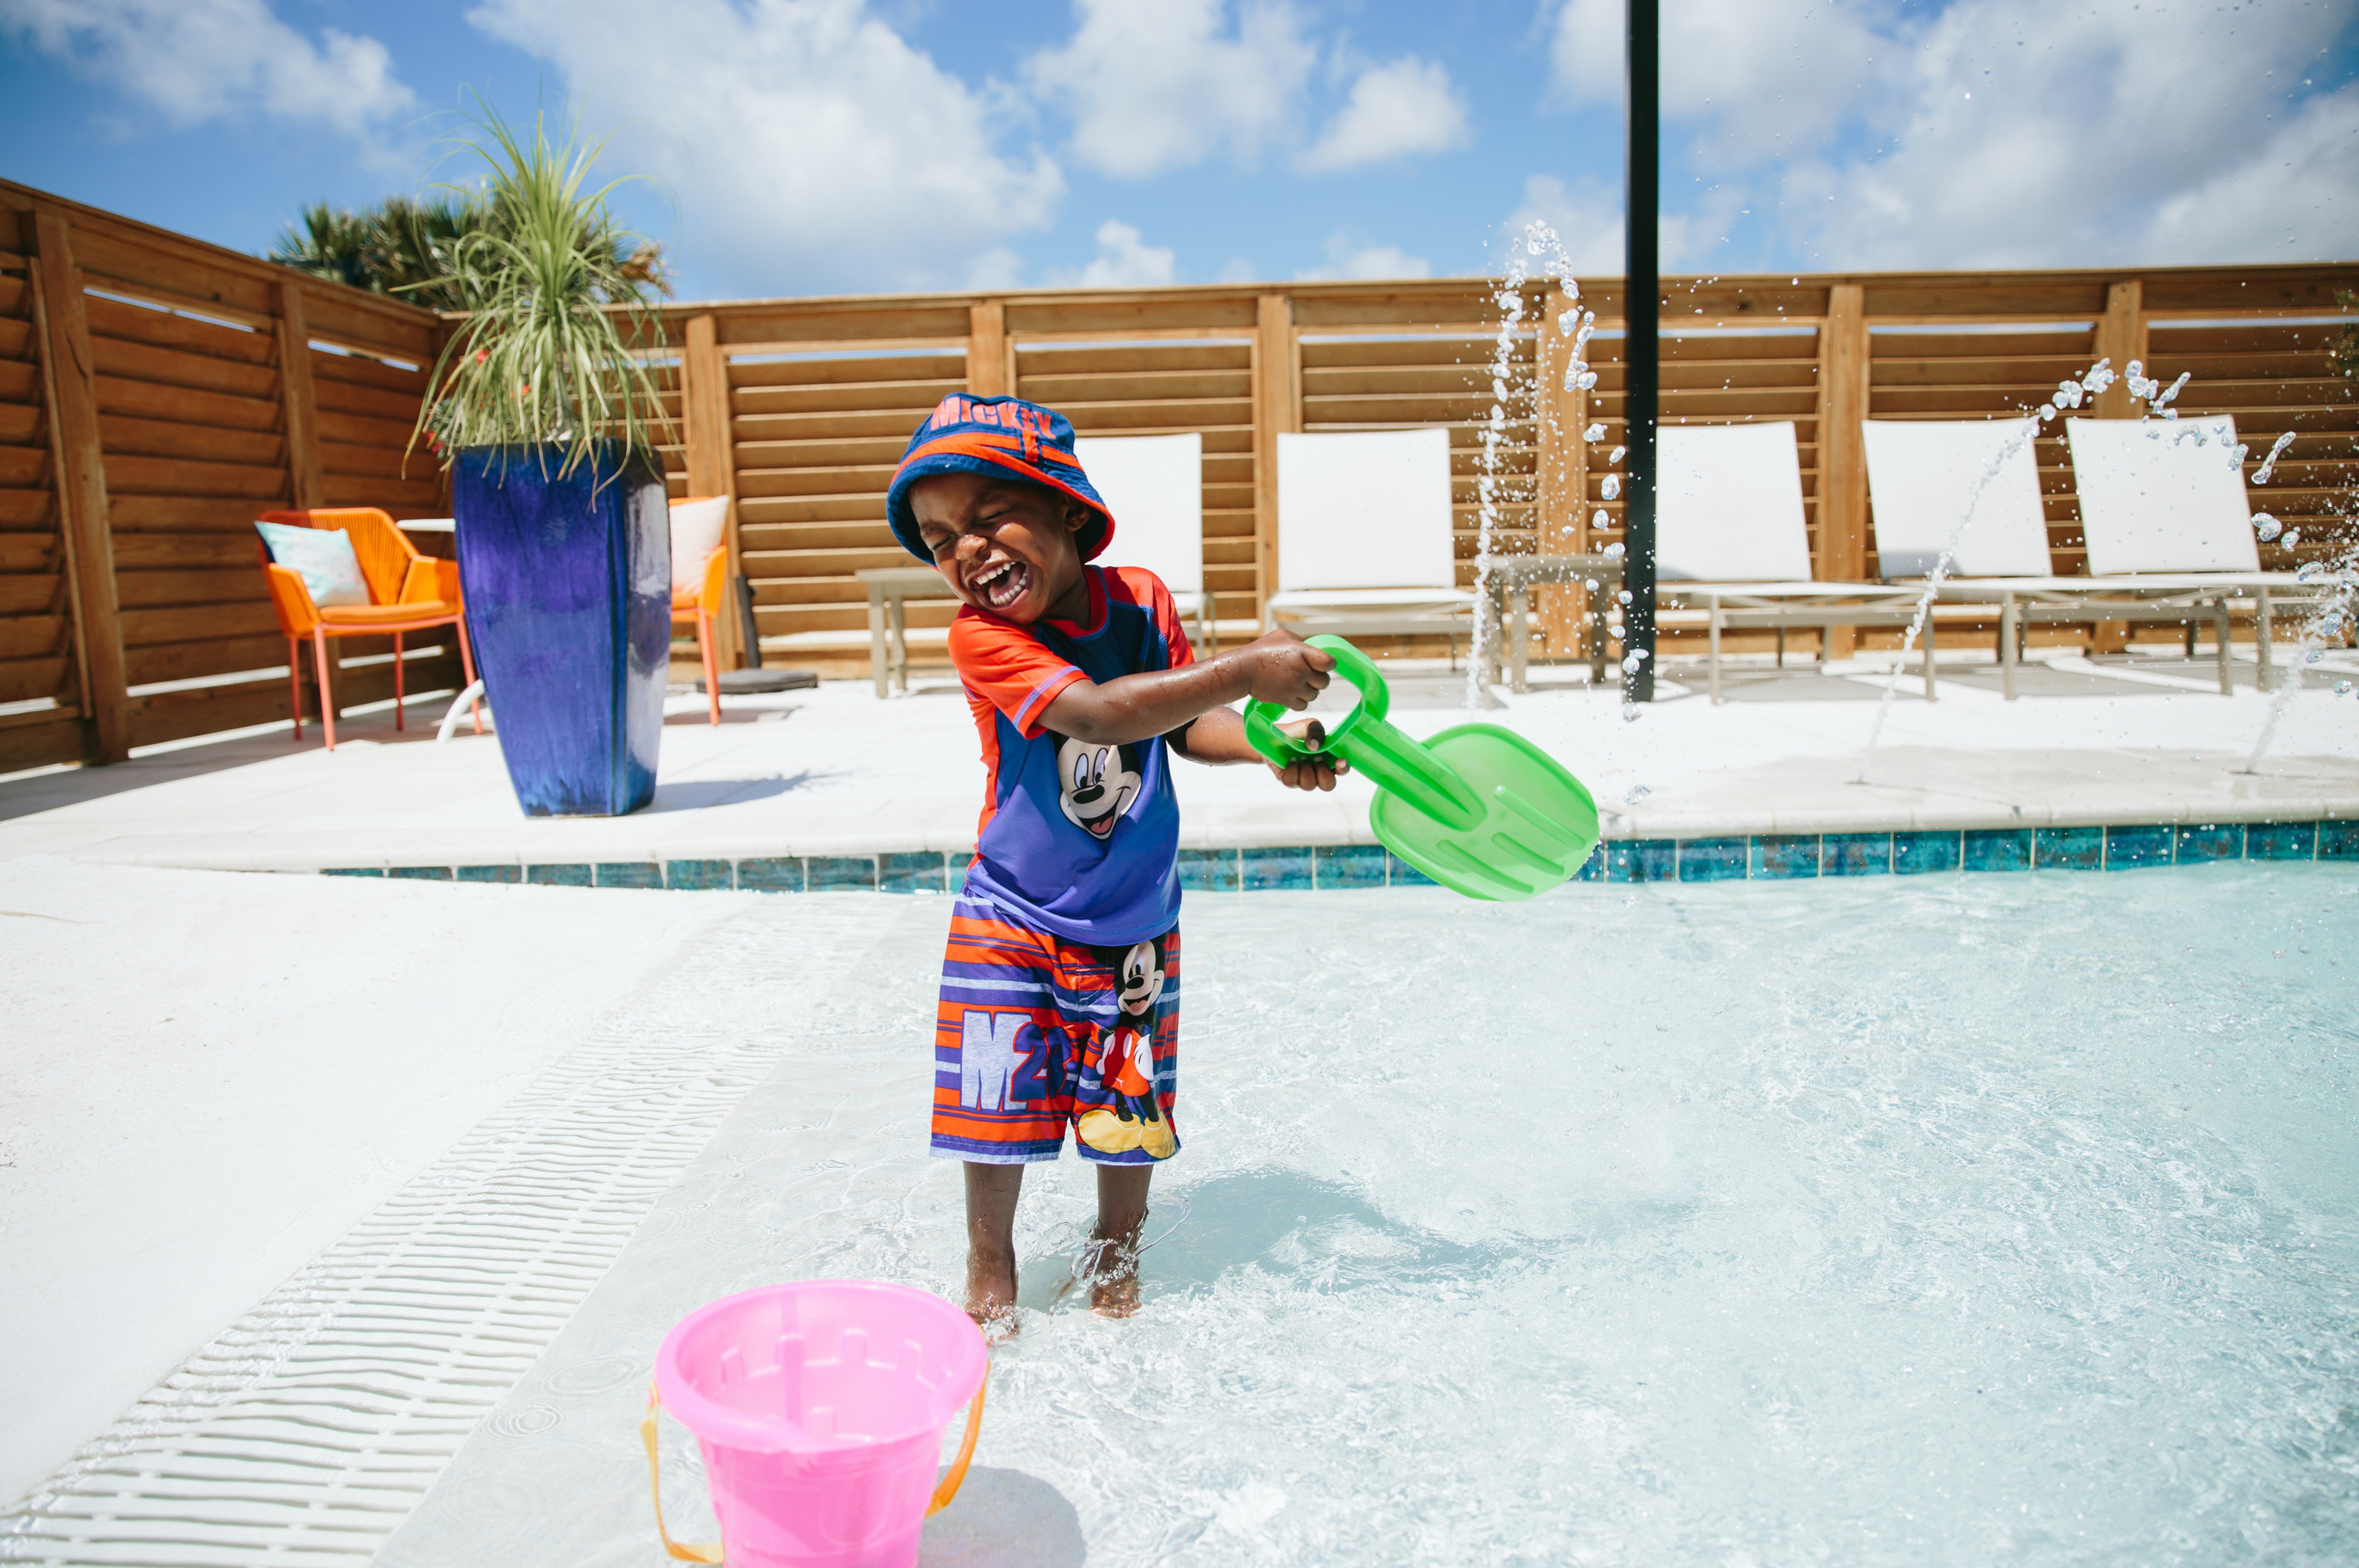 Take a splash in our outdoor pool